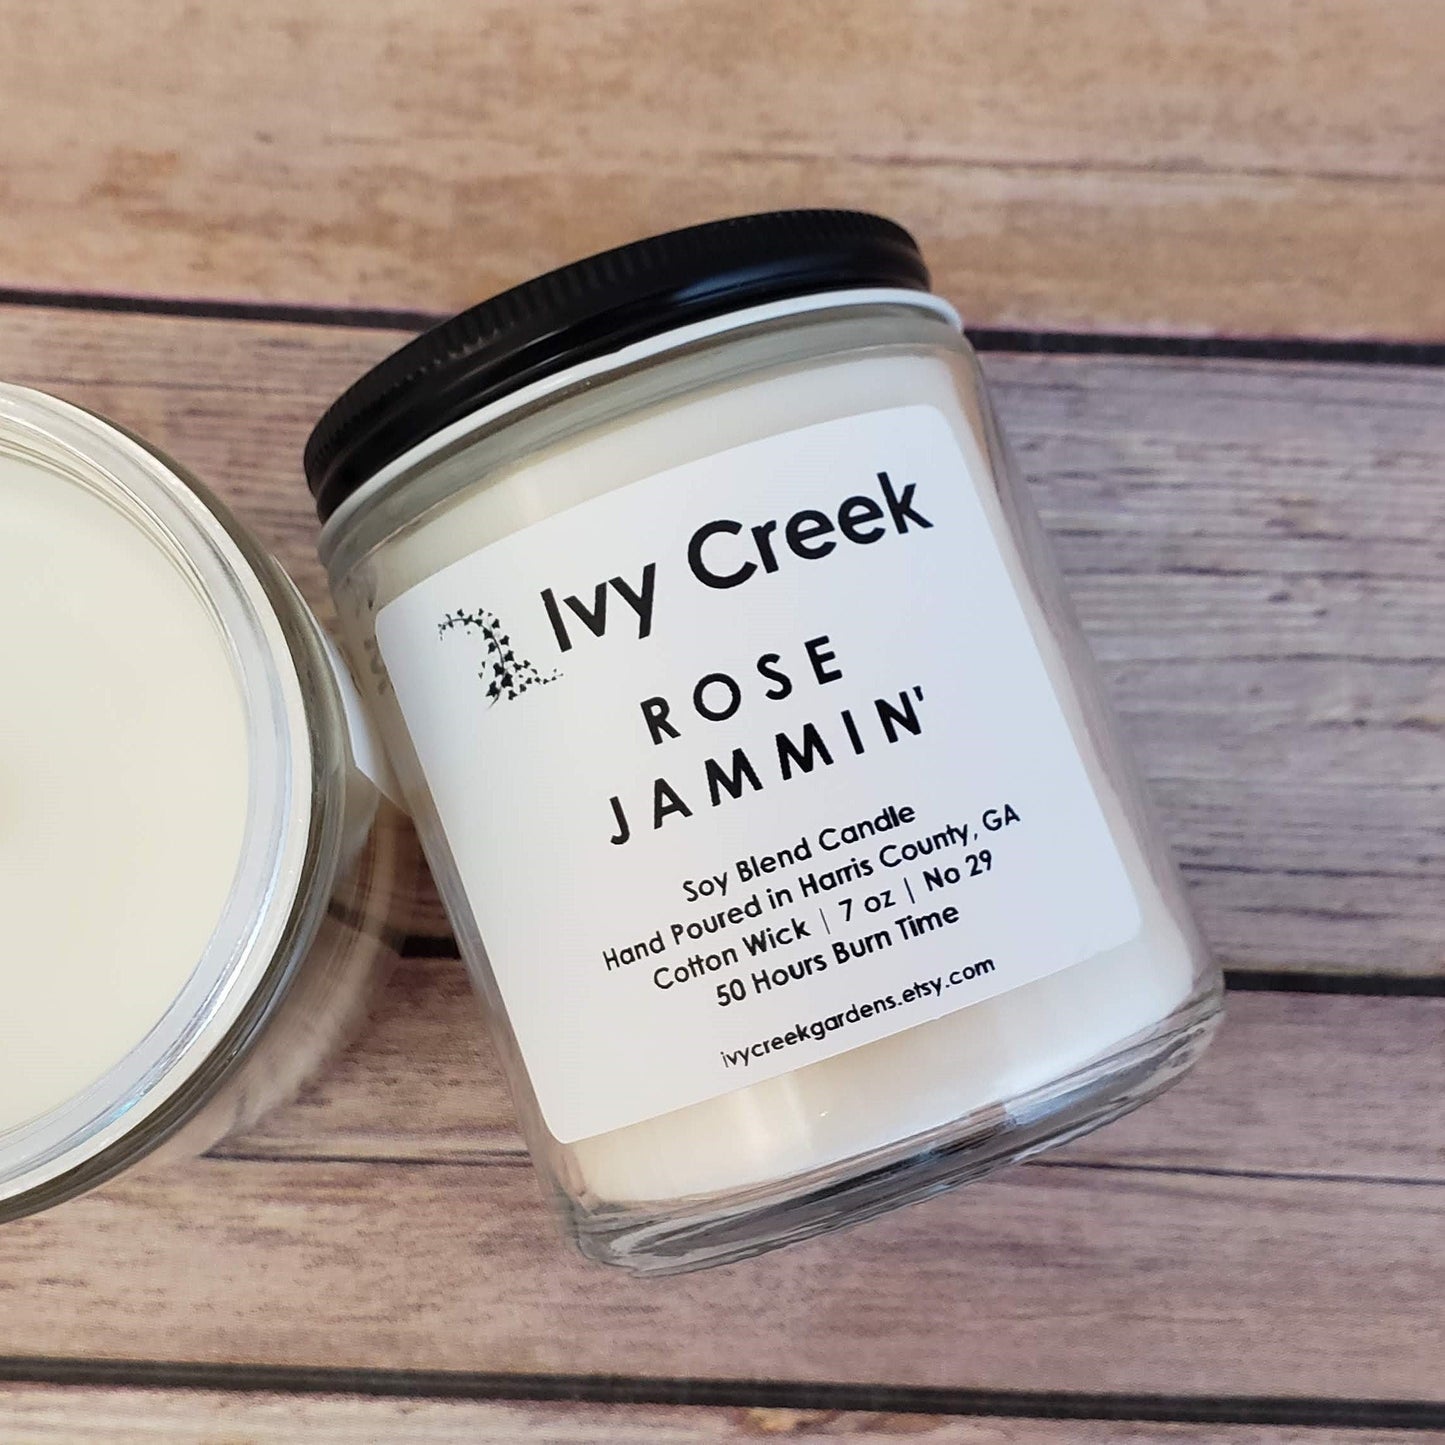 Ivy Creek No 29 Rose Jammin' Soy Blend Candle - 7 oz, Hand Poured, Cotton Wick, Small Batch, Clean Burning, Container Candle